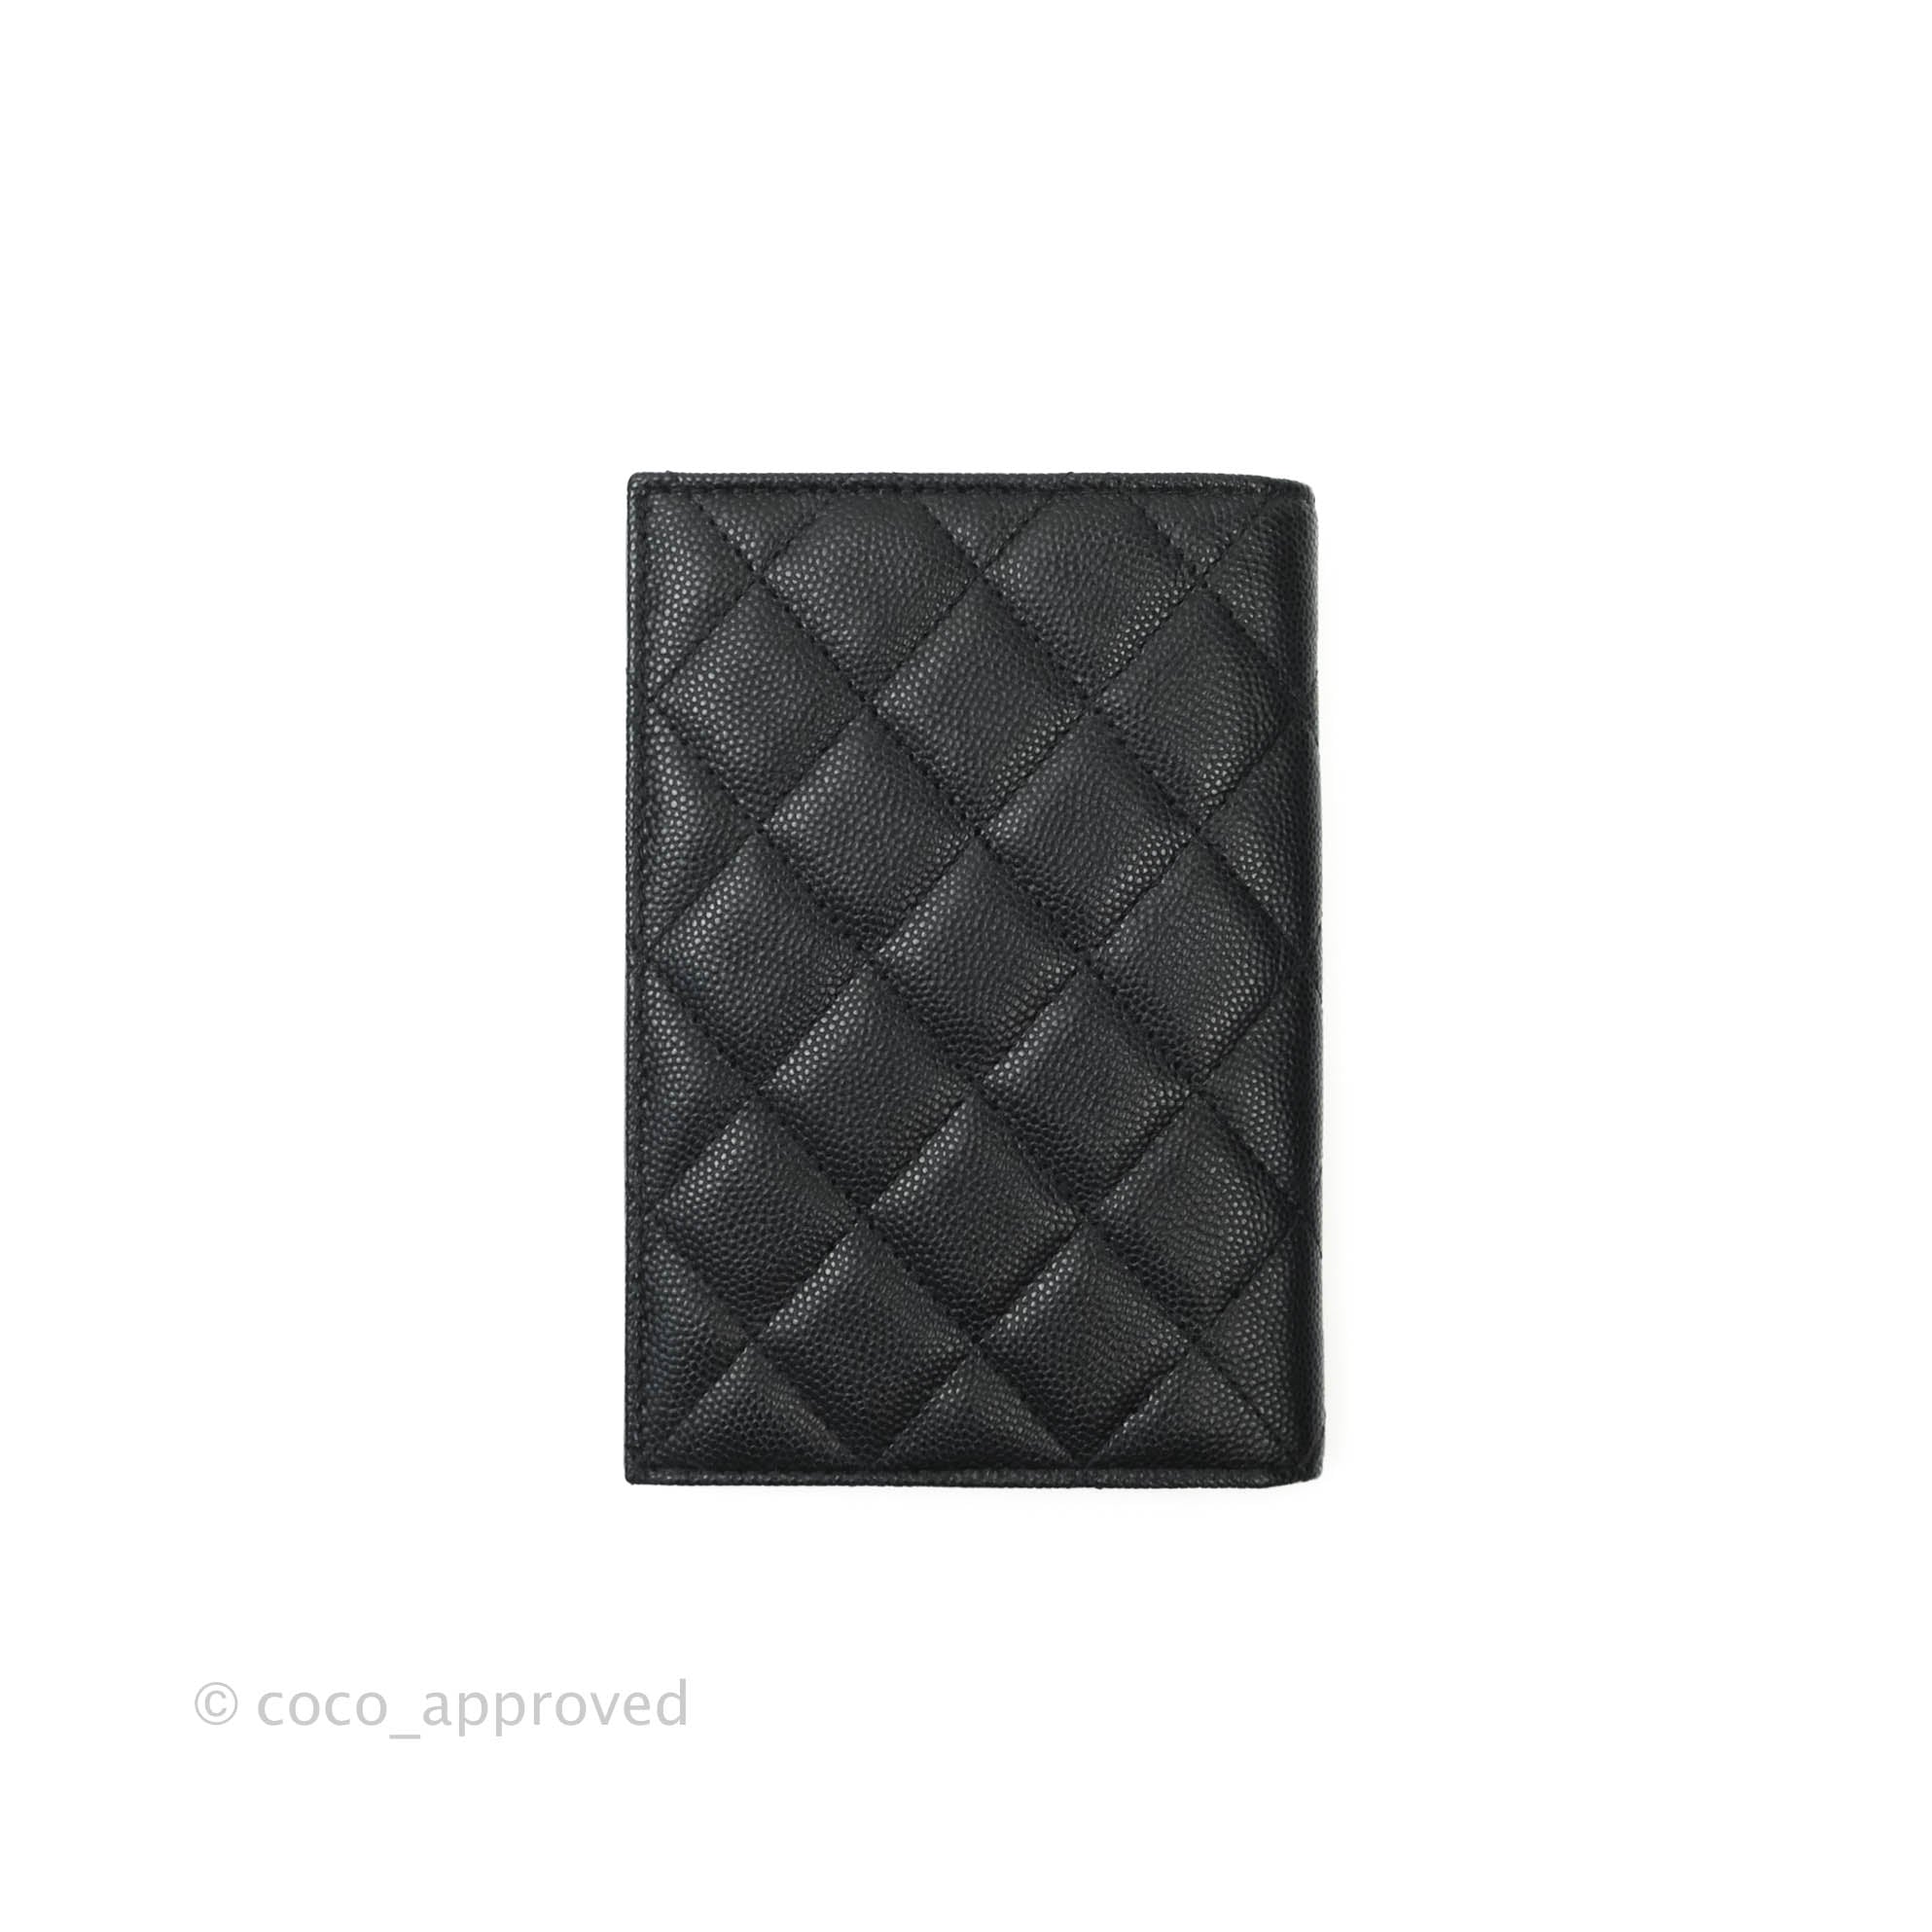 Chanel Classic Quilted Caviar Black Passport Holder Gold